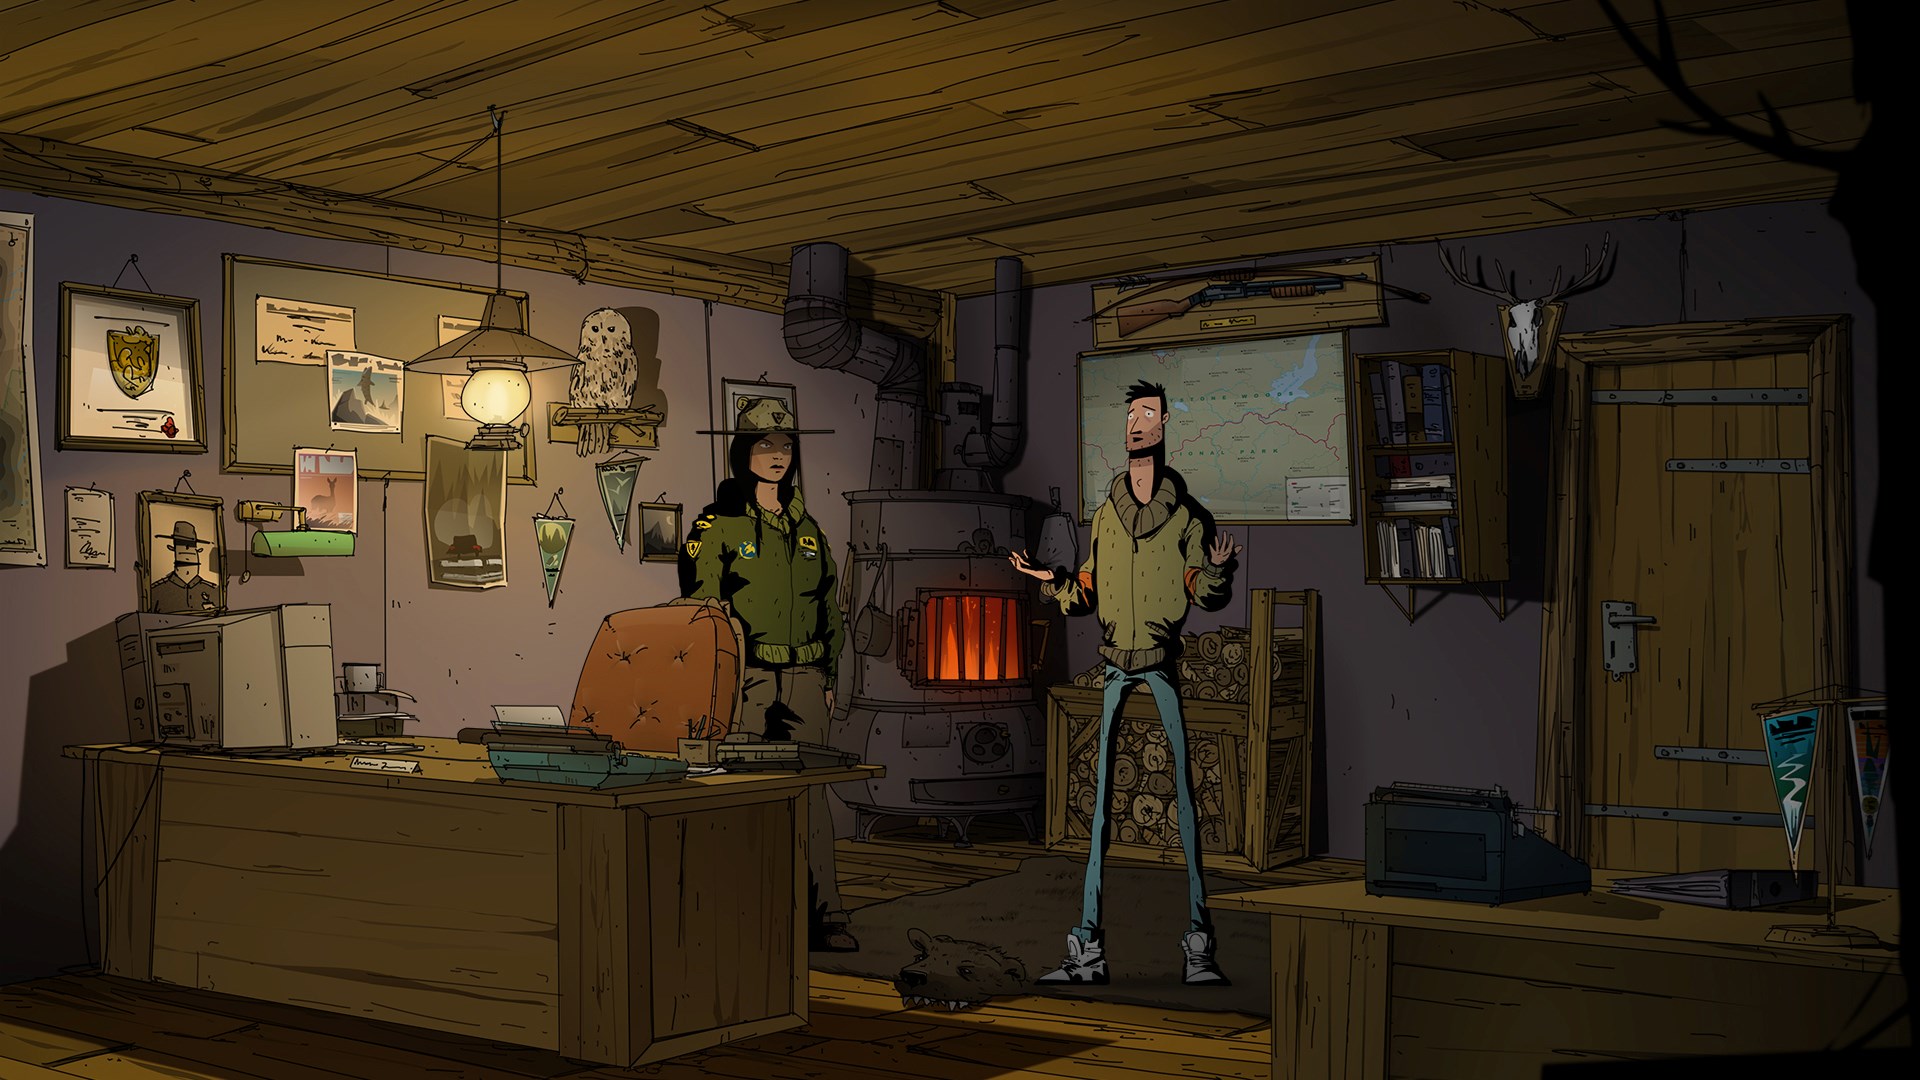 You can buy the game. Unforeseen incidents игра. Unforeseen incidents версия 1 0 1. Unforeseen incidents Walkthrough. Квест unforeseen.